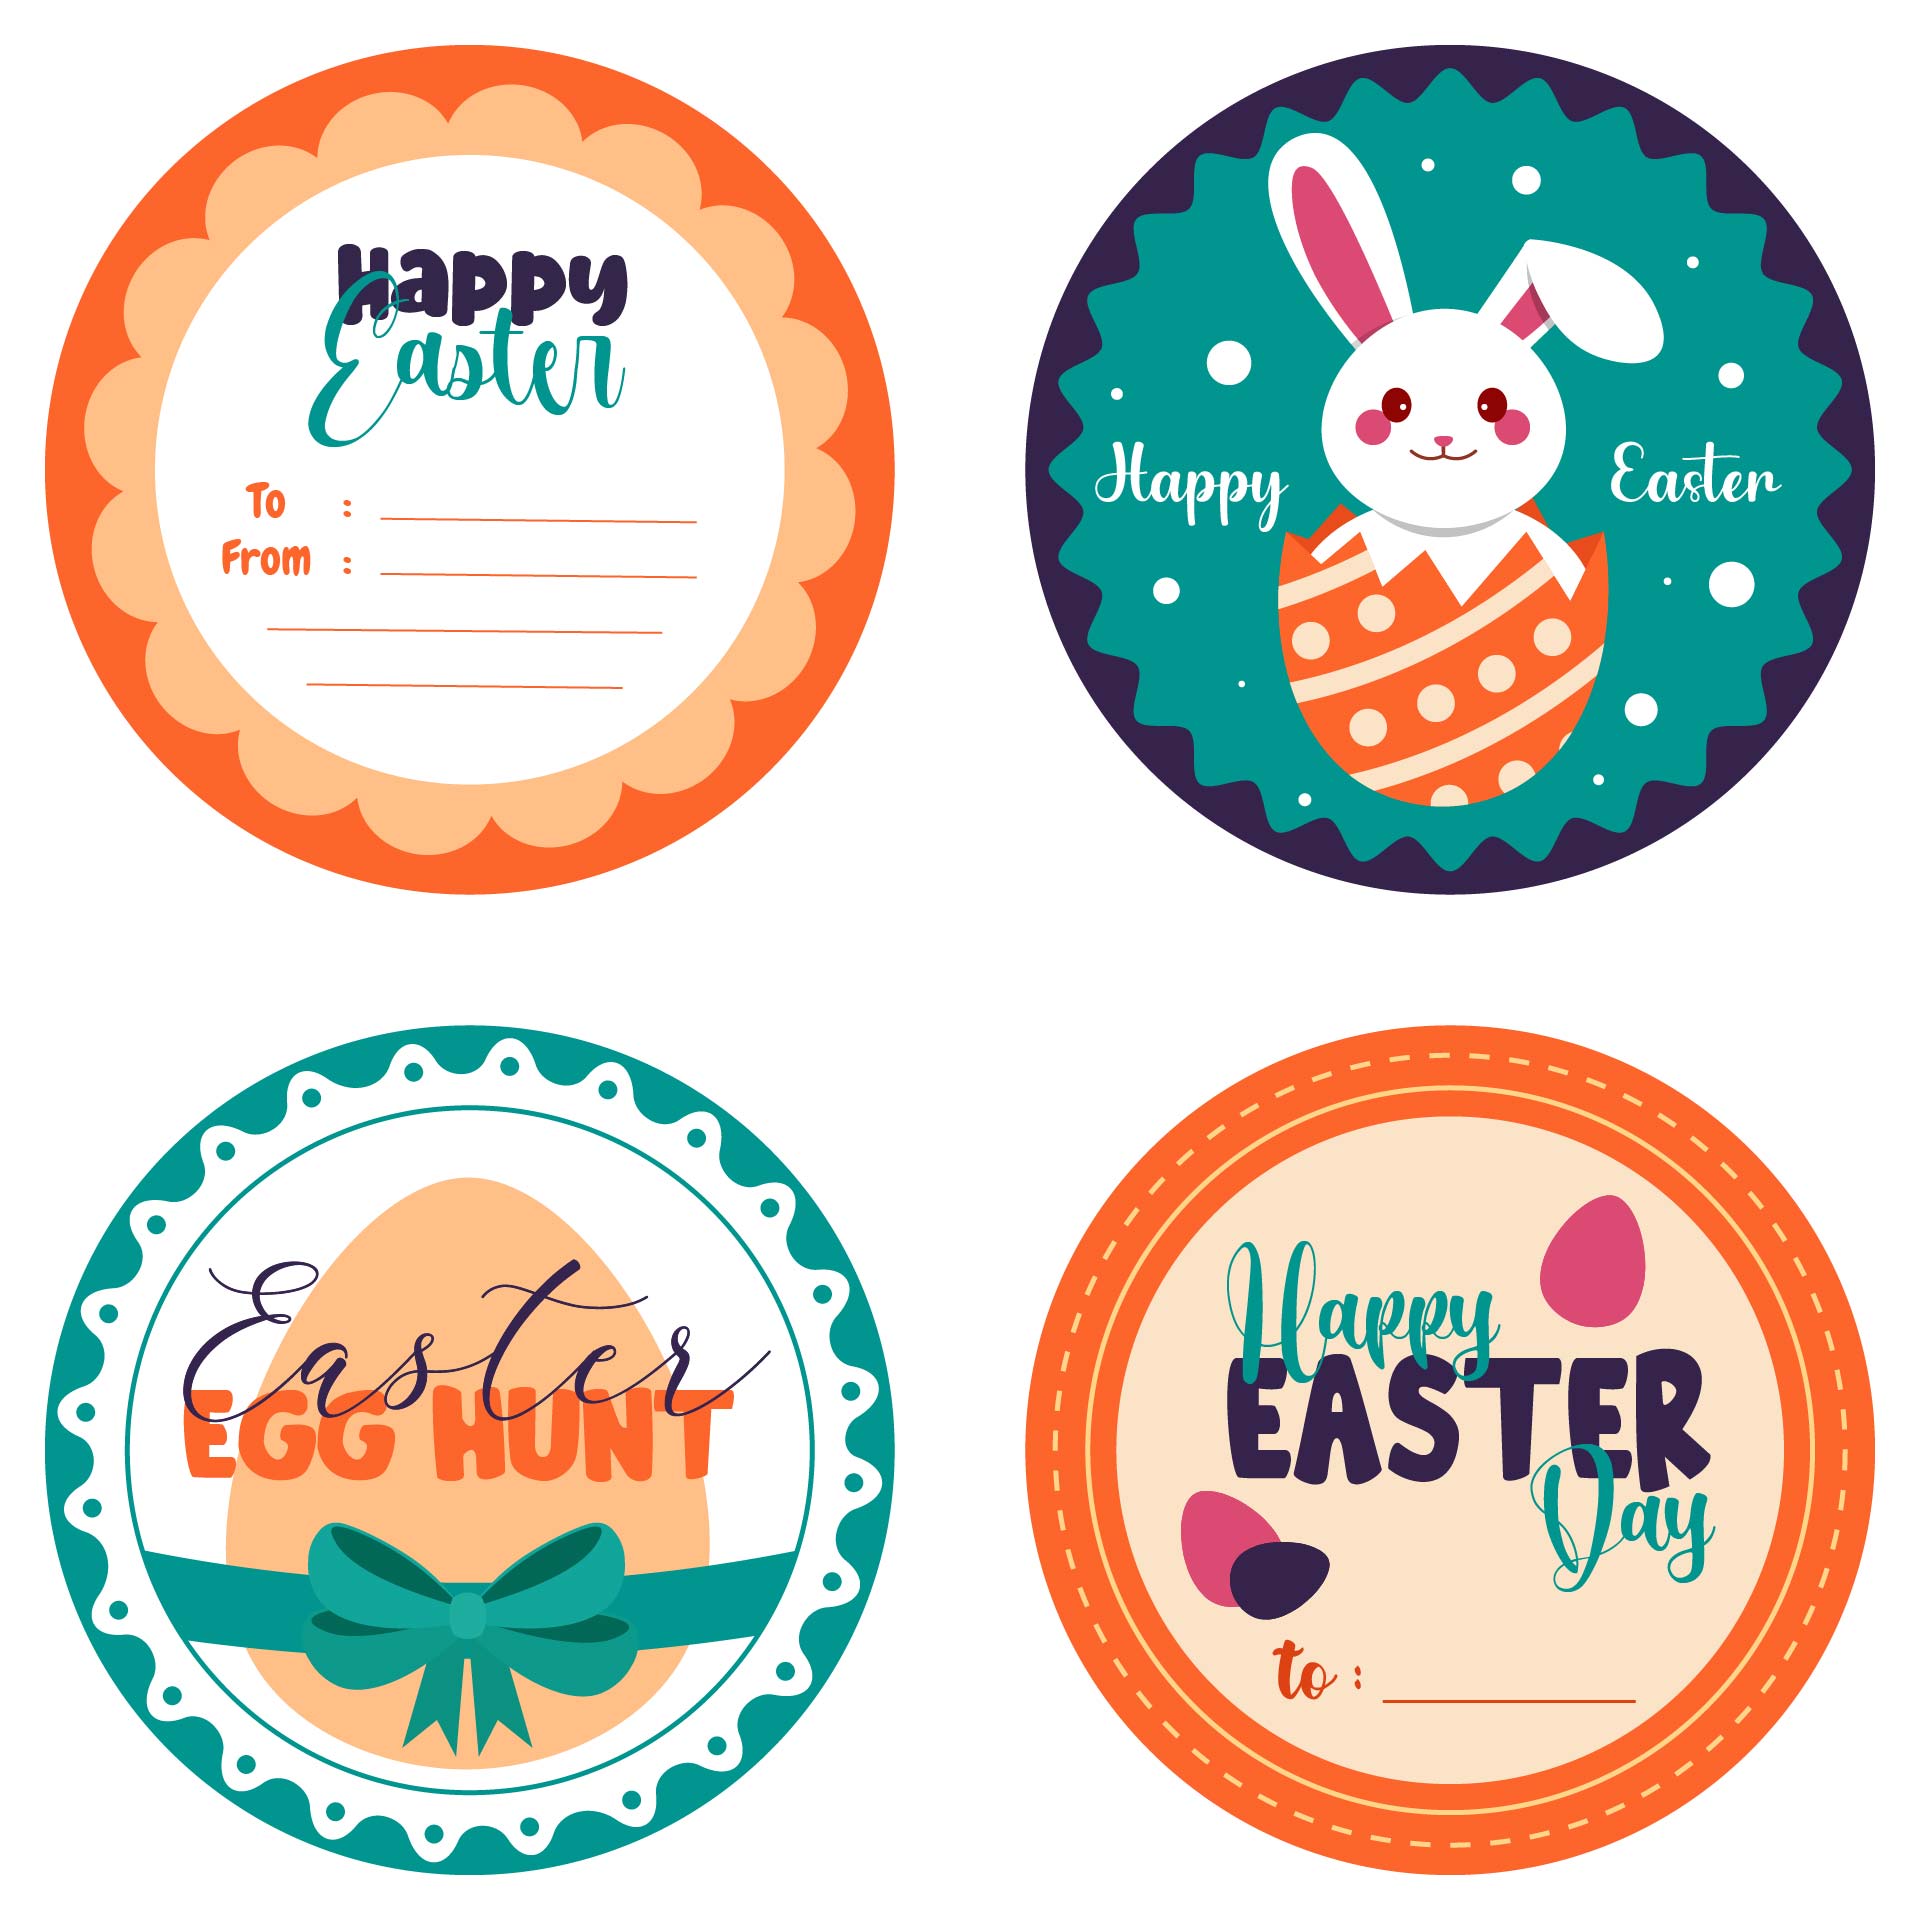 free-printable-happy-easter-labels-templates-printable-download